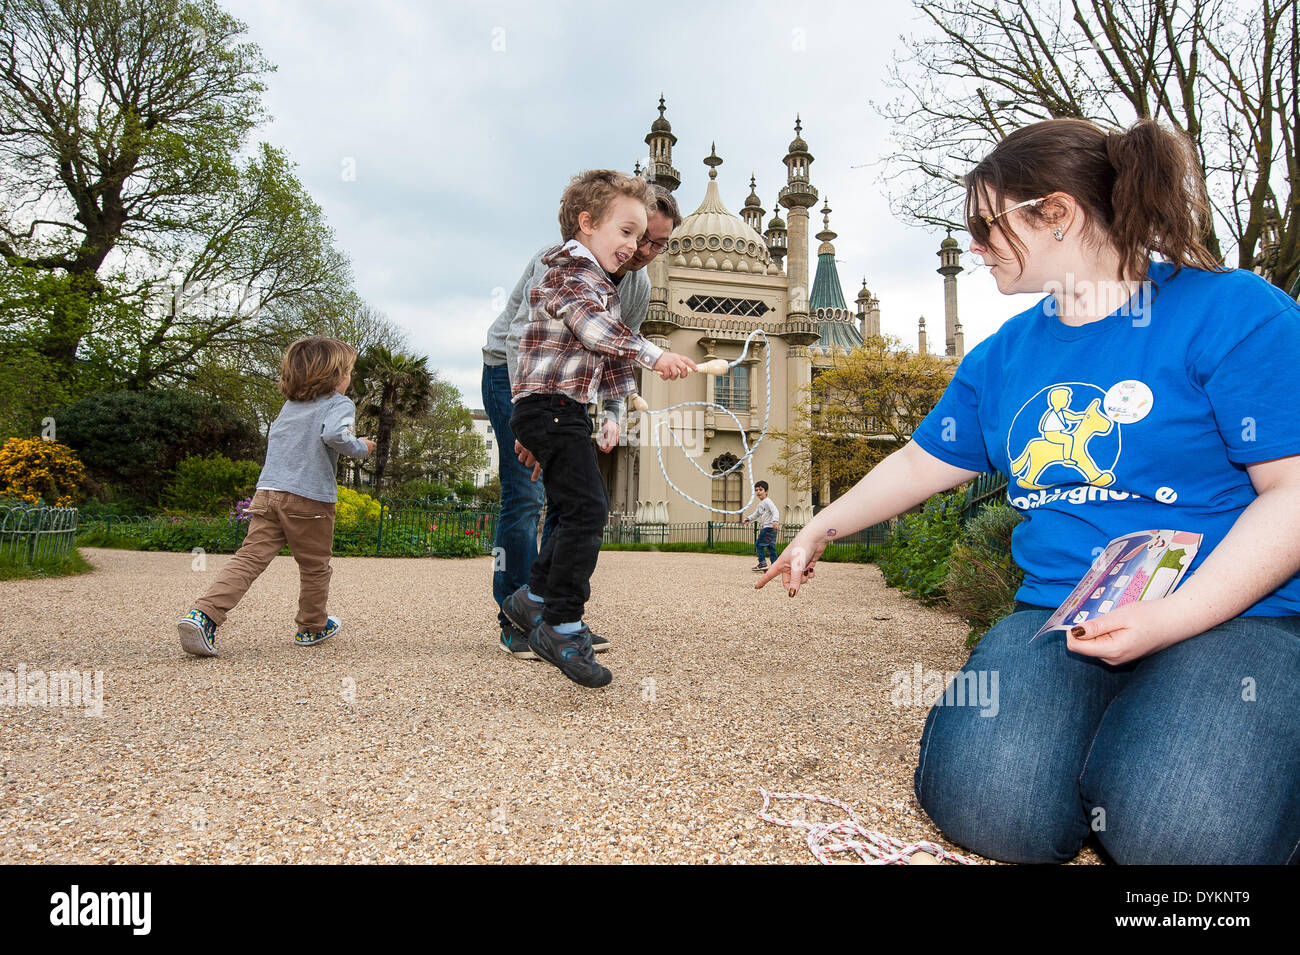 Brighton, UK. 21st Apr, 2014. Gabriel Mauclare skipping at the Easter egg games as Brighton & Hove Food and Drink Festival hold an Easter Egg hunt in aid of the children's charity Rockinghorse in Pavilion Gardens, Brighton. Children complete games to find Easter eggs around the Brighton Pavilion gardens: egg and spoon race, skipping, quoits and card games before making a badge and receiving a medal for their efforts. The event is sponsored by PHS Group PLC and raises over £400 for the Rockinghorse charity.  Credit:  Julia Claxton/Alamy Live News Stock Photo